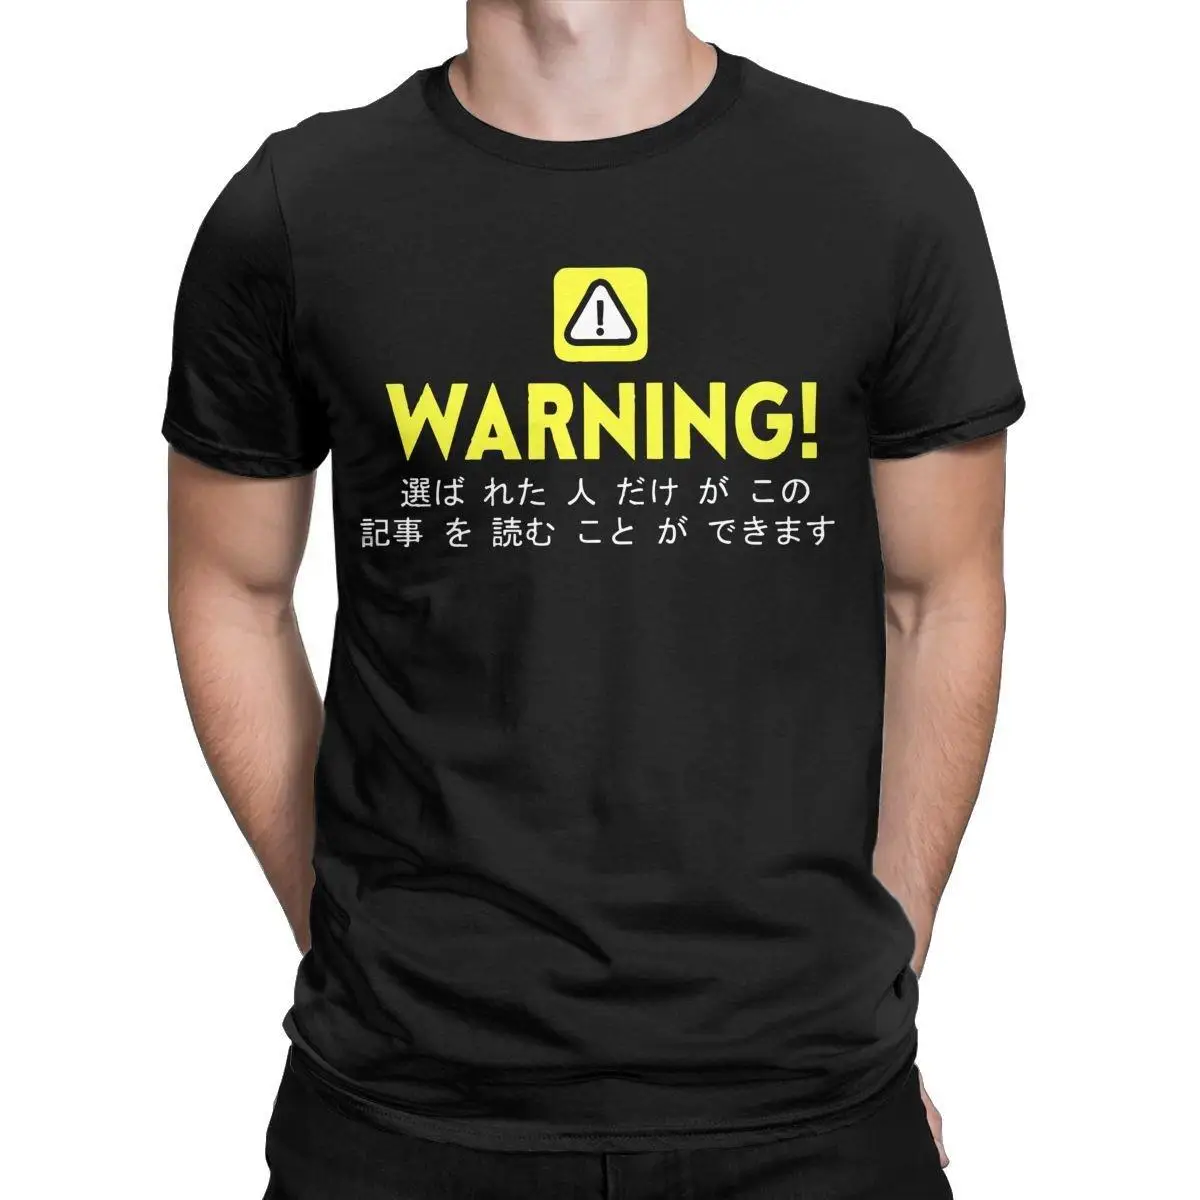 Men T-Shirts Anime Warning Signs Tee Shirt Short Sleeve Only Selected People Can Read This Text T Shirt Crew Neck Clothes Gift